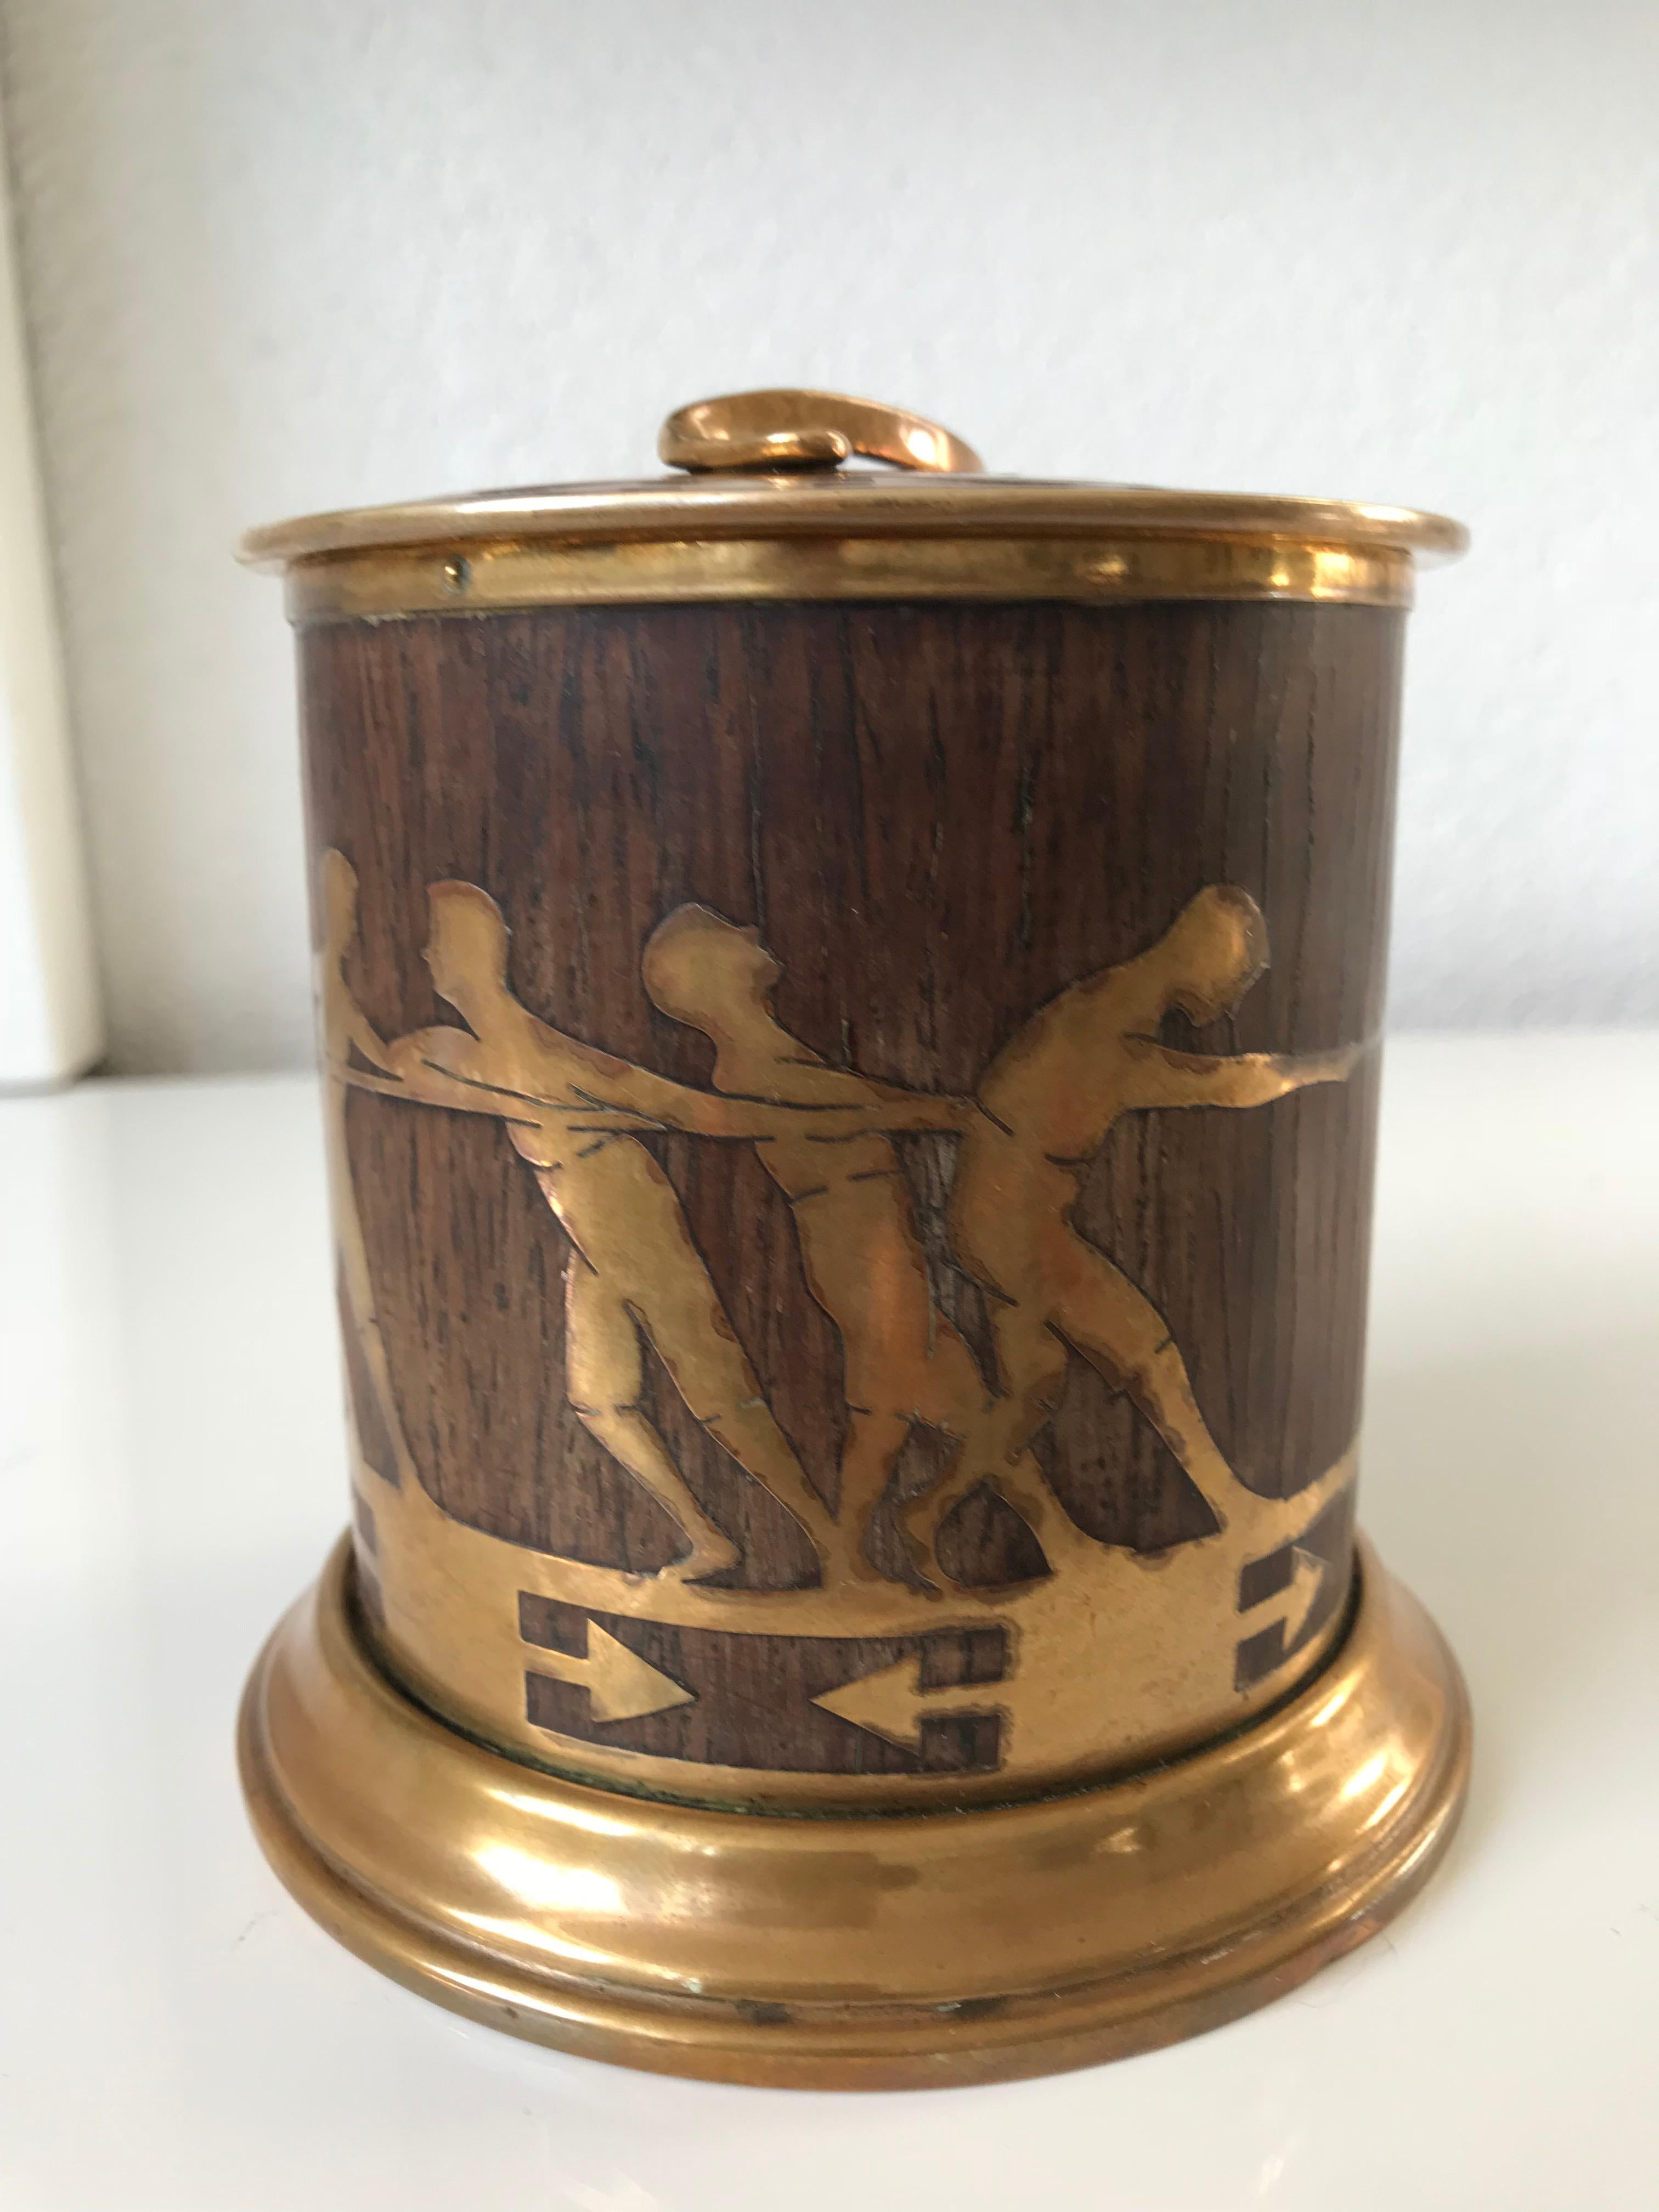 Stunning and rare Secession box.

There are -for good reasons- collectors of the Viennese Secessionist Style in almost every country on this planet. The finesse of the workmanship, the quality of the materials and the stunning designs have a